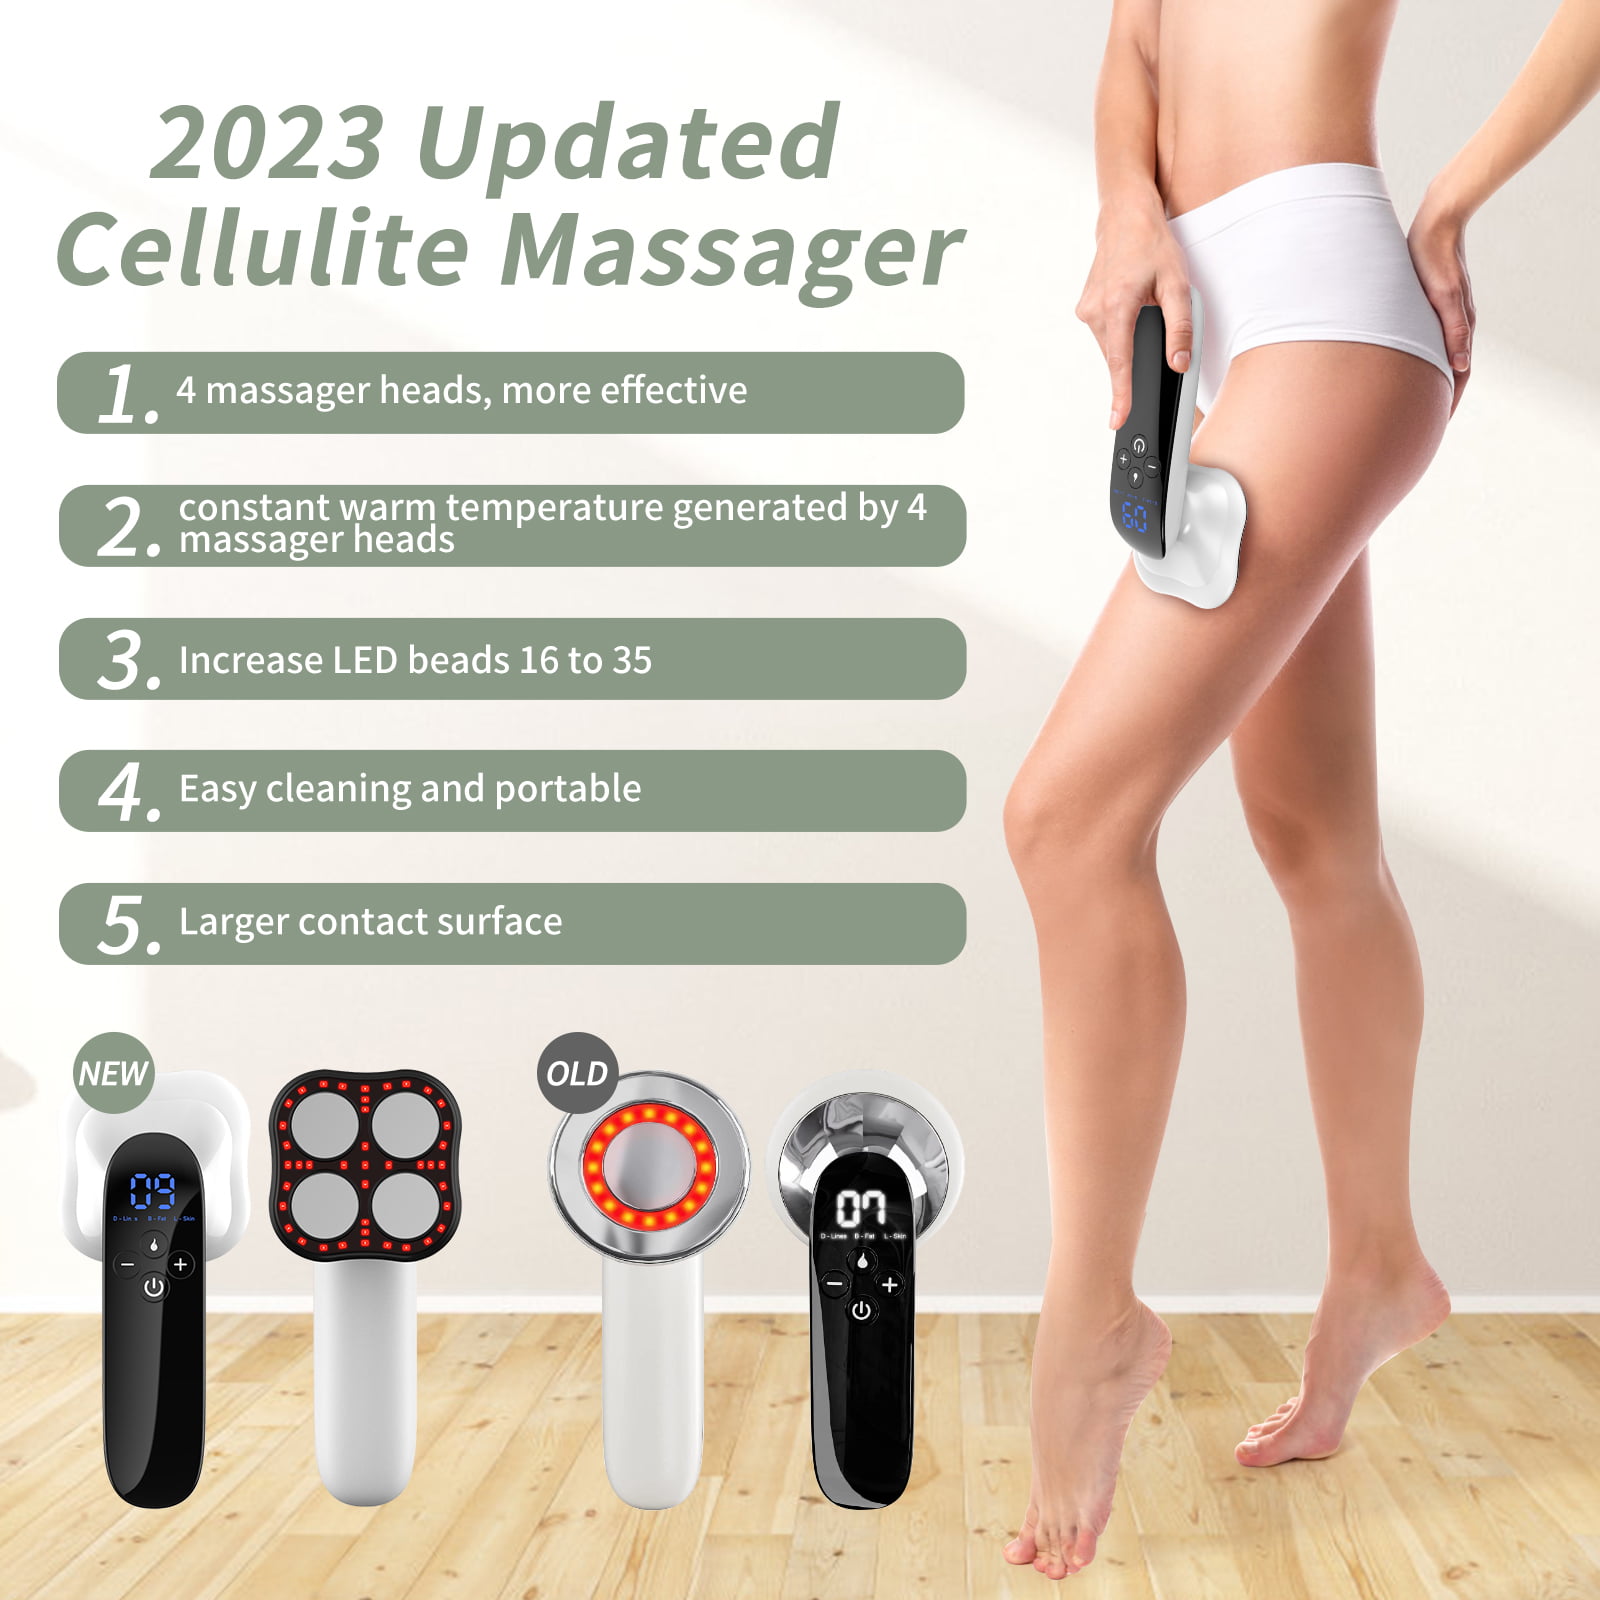 13 Best Cellulite Massagers To Buy In 2023